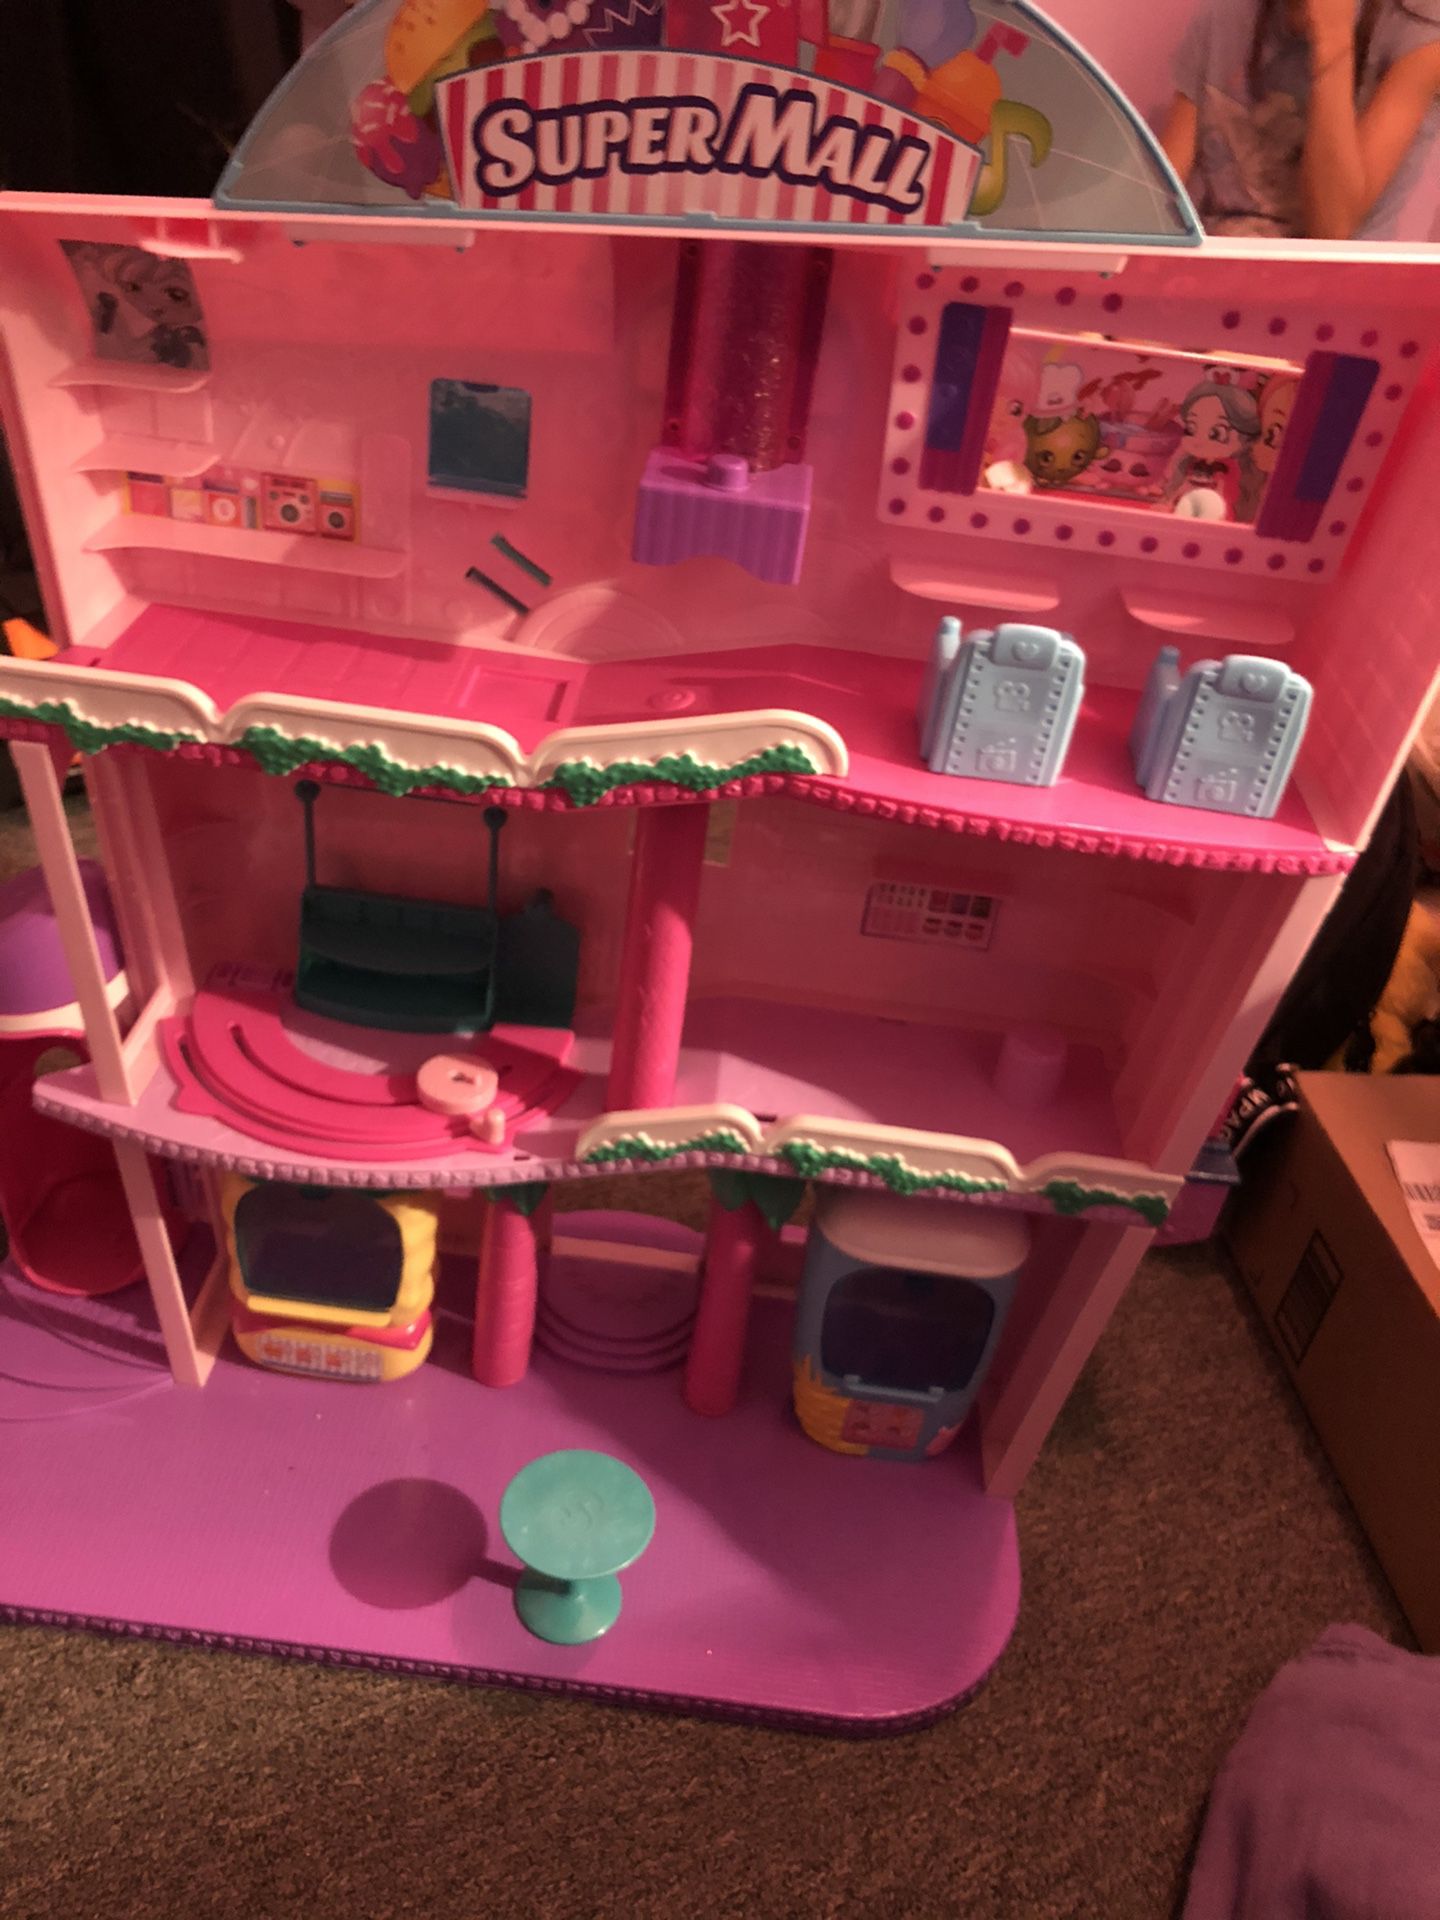 Shopkins mall comes with many accessories